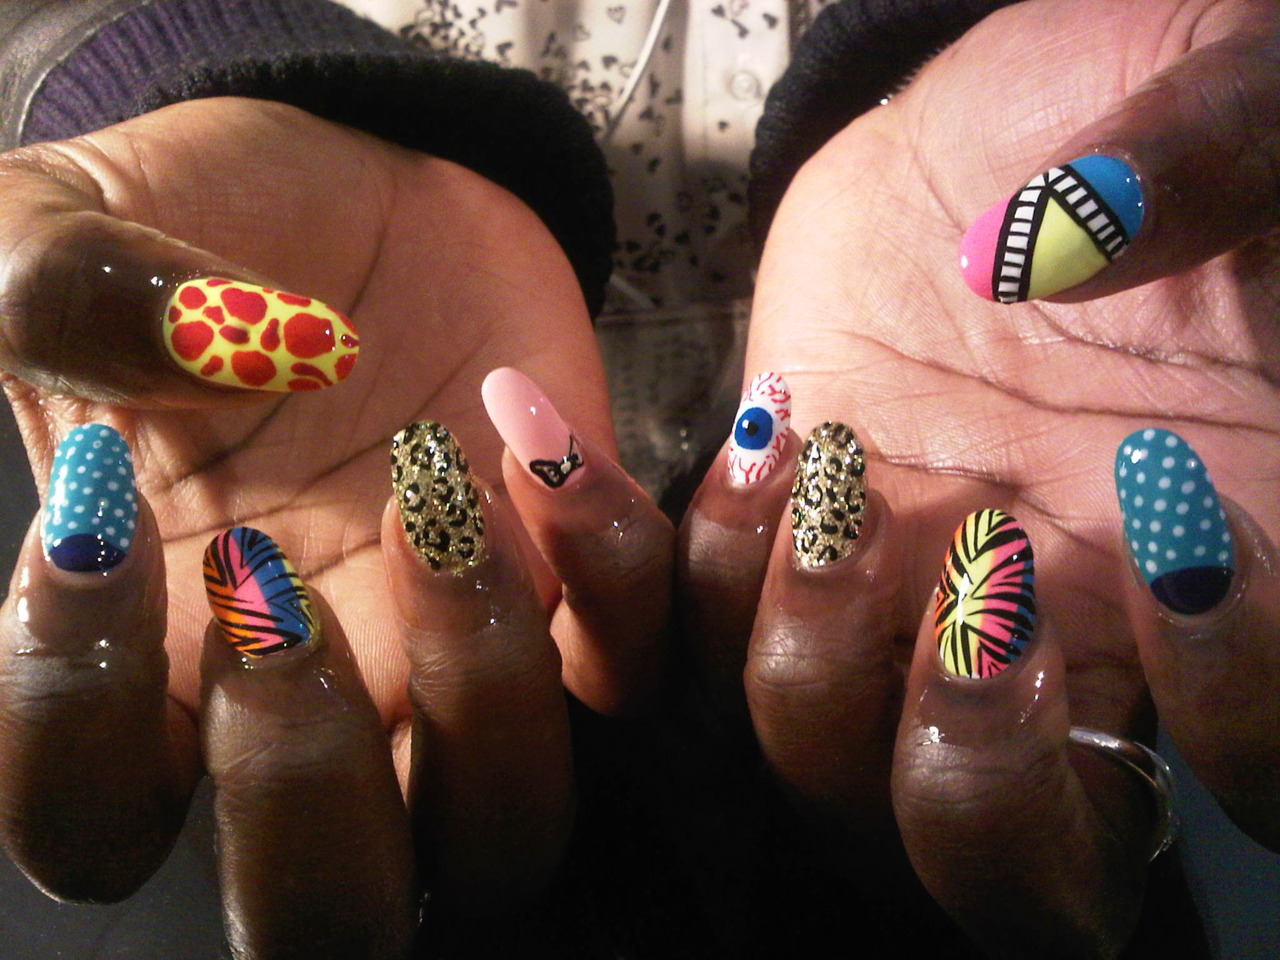 Gallery of ghetto nail designs.